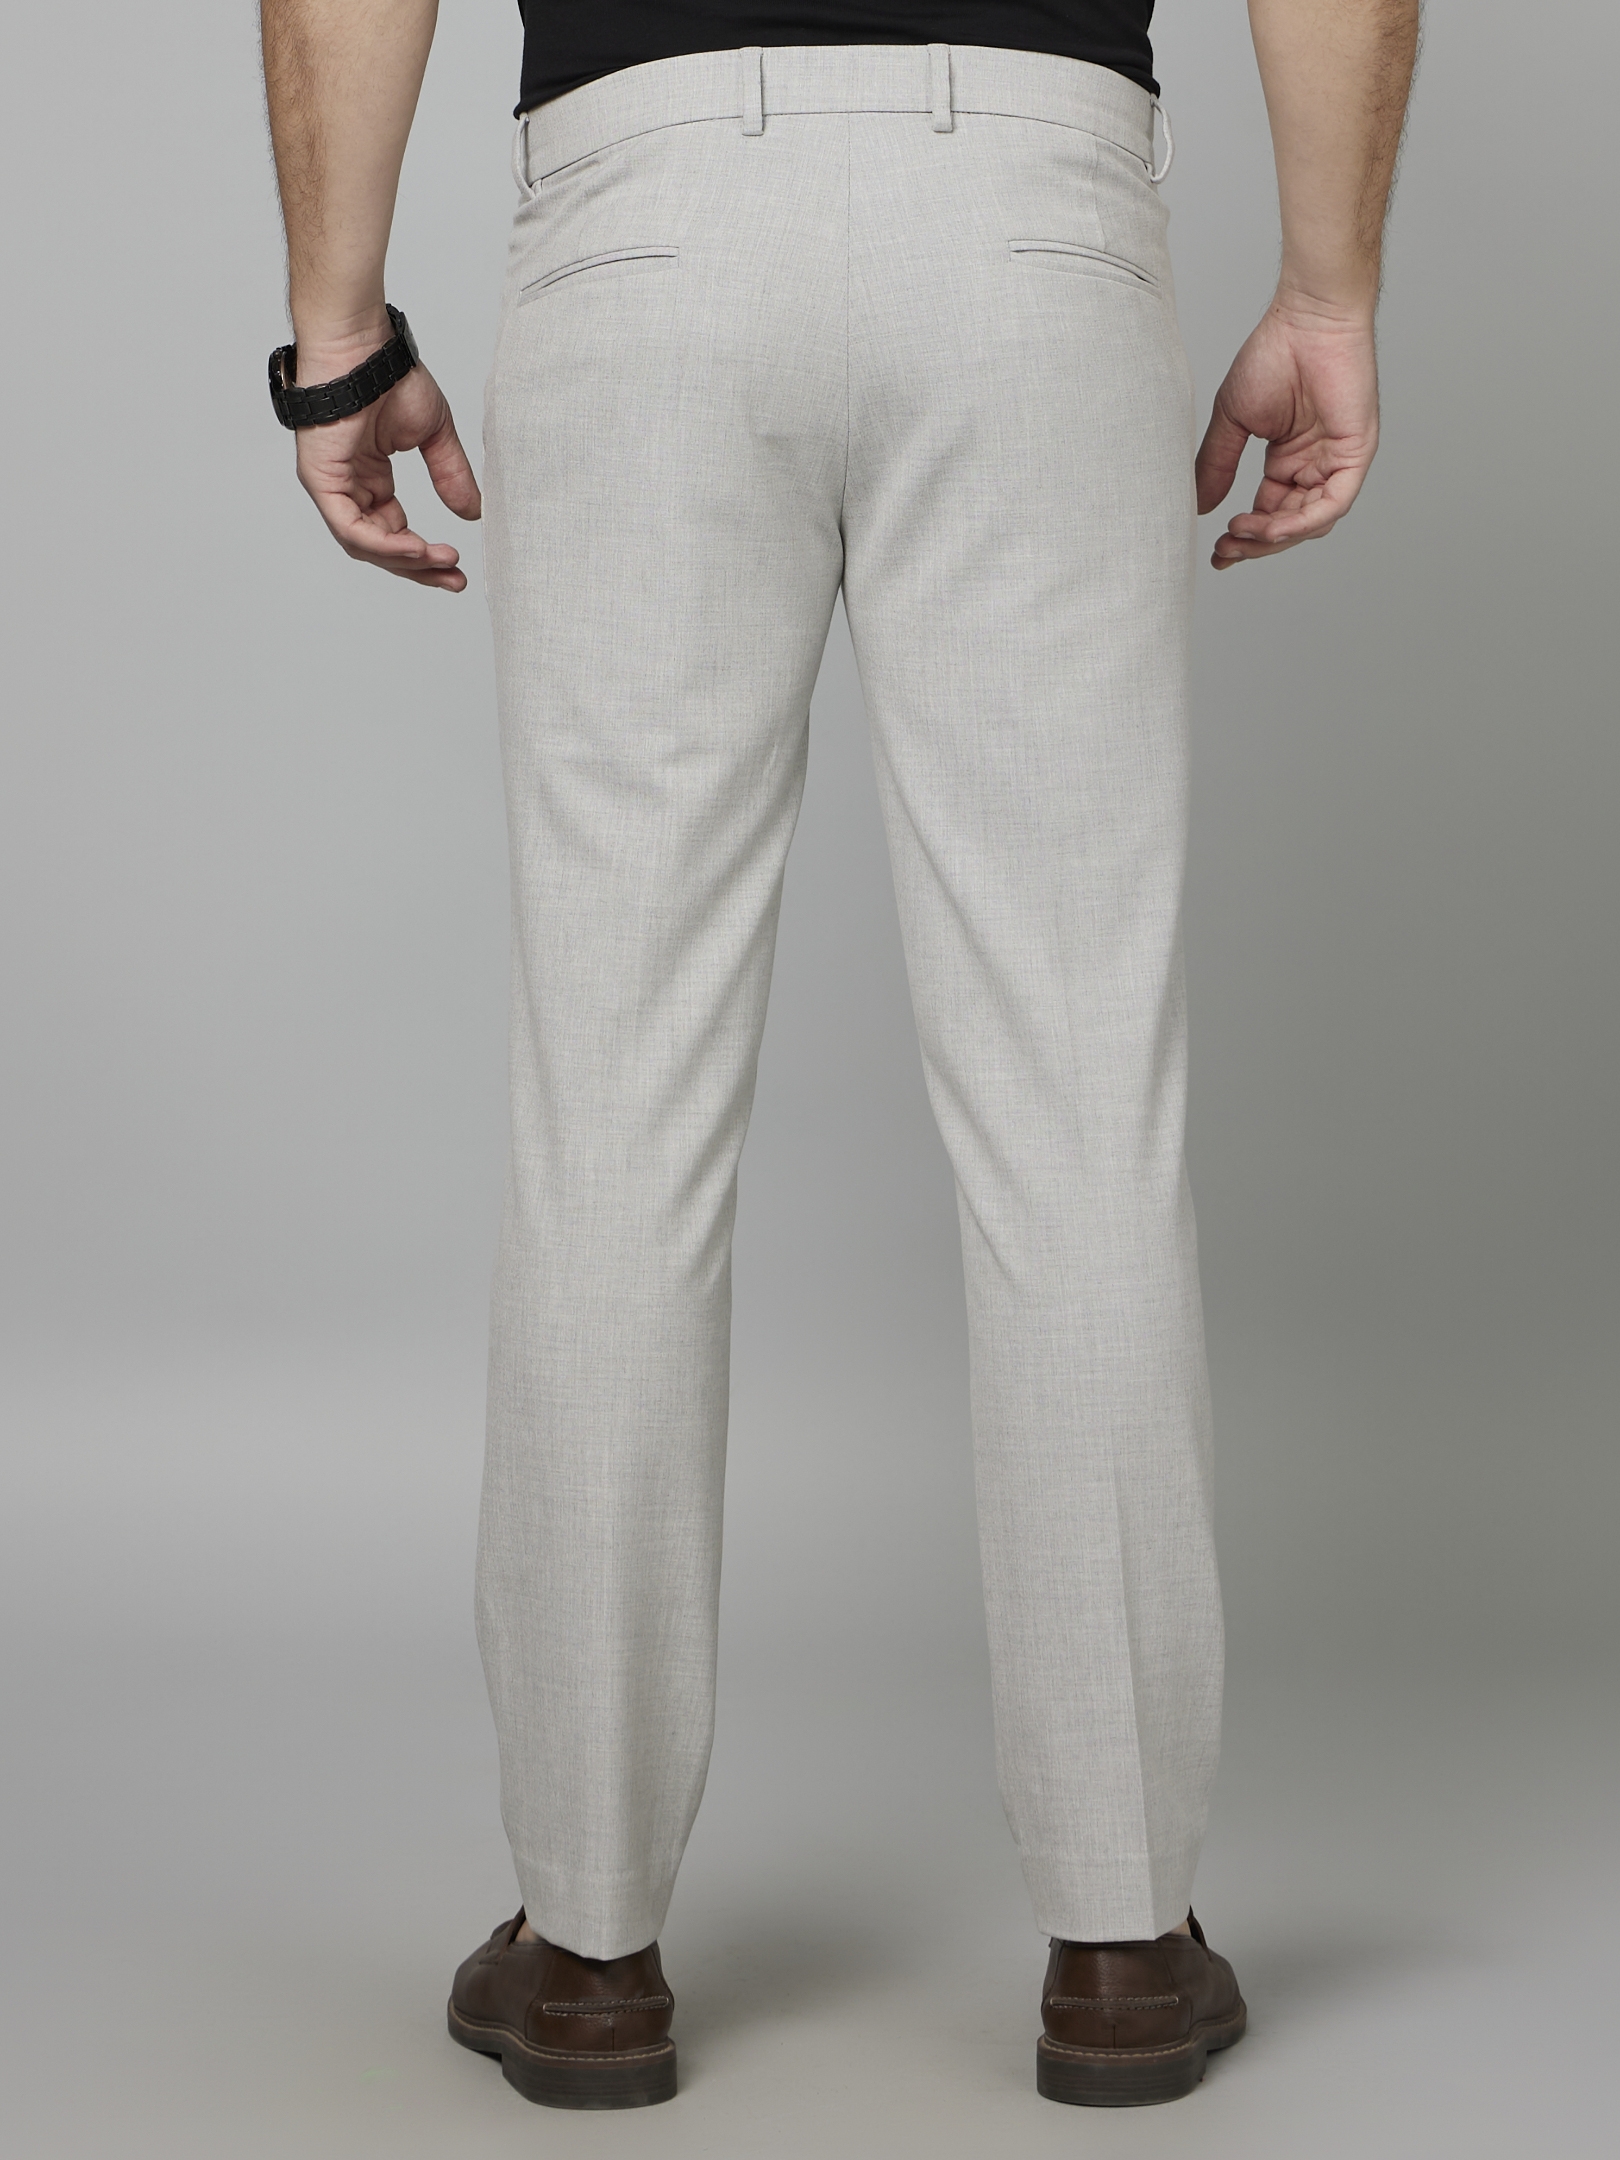 Men's Grey Blended Solid Trousers